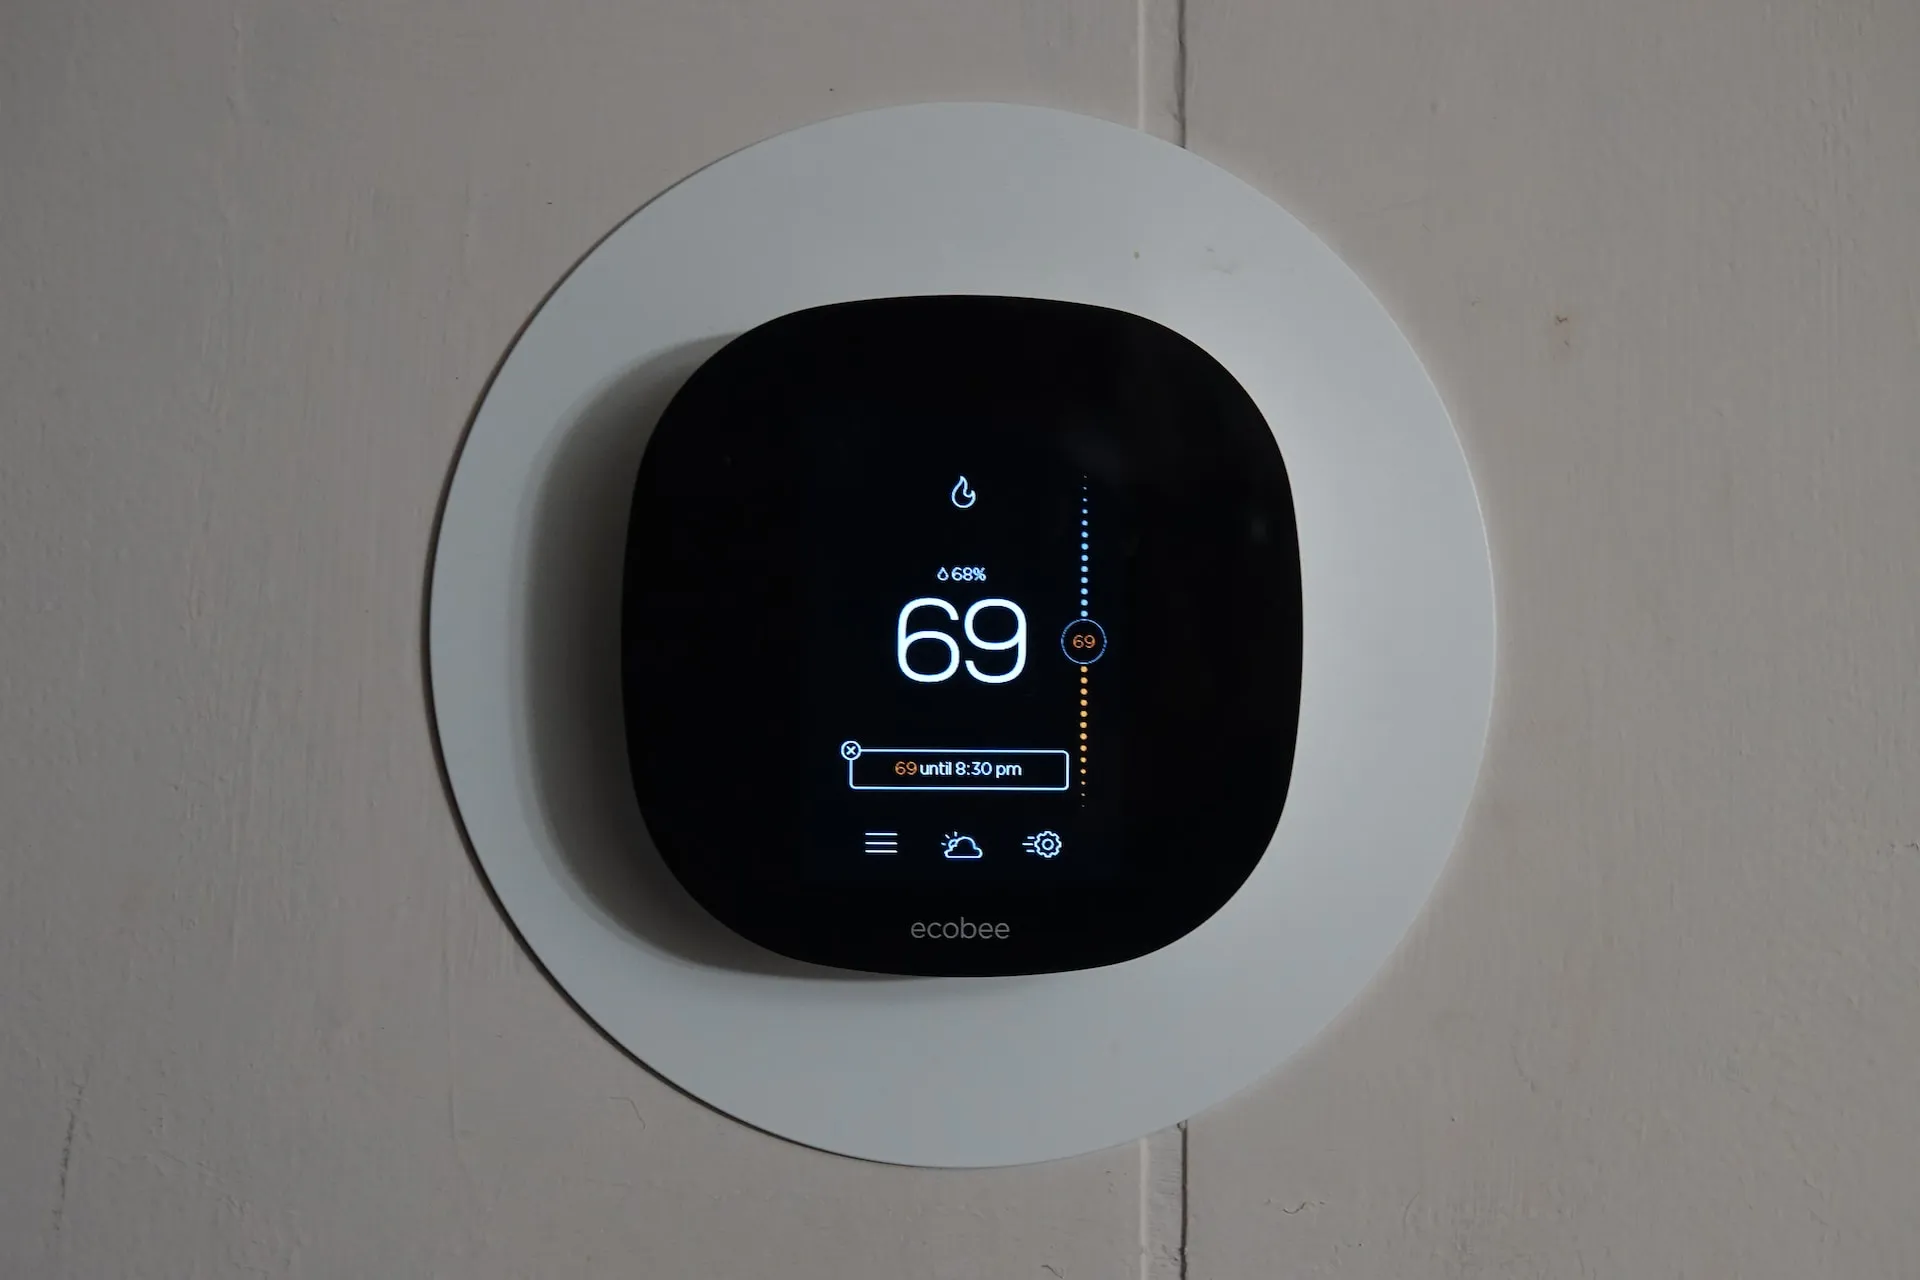 A smart thermostat mounted on the wall, depicted in the image, requires alt text that is concise and limited to 125 characters or less.